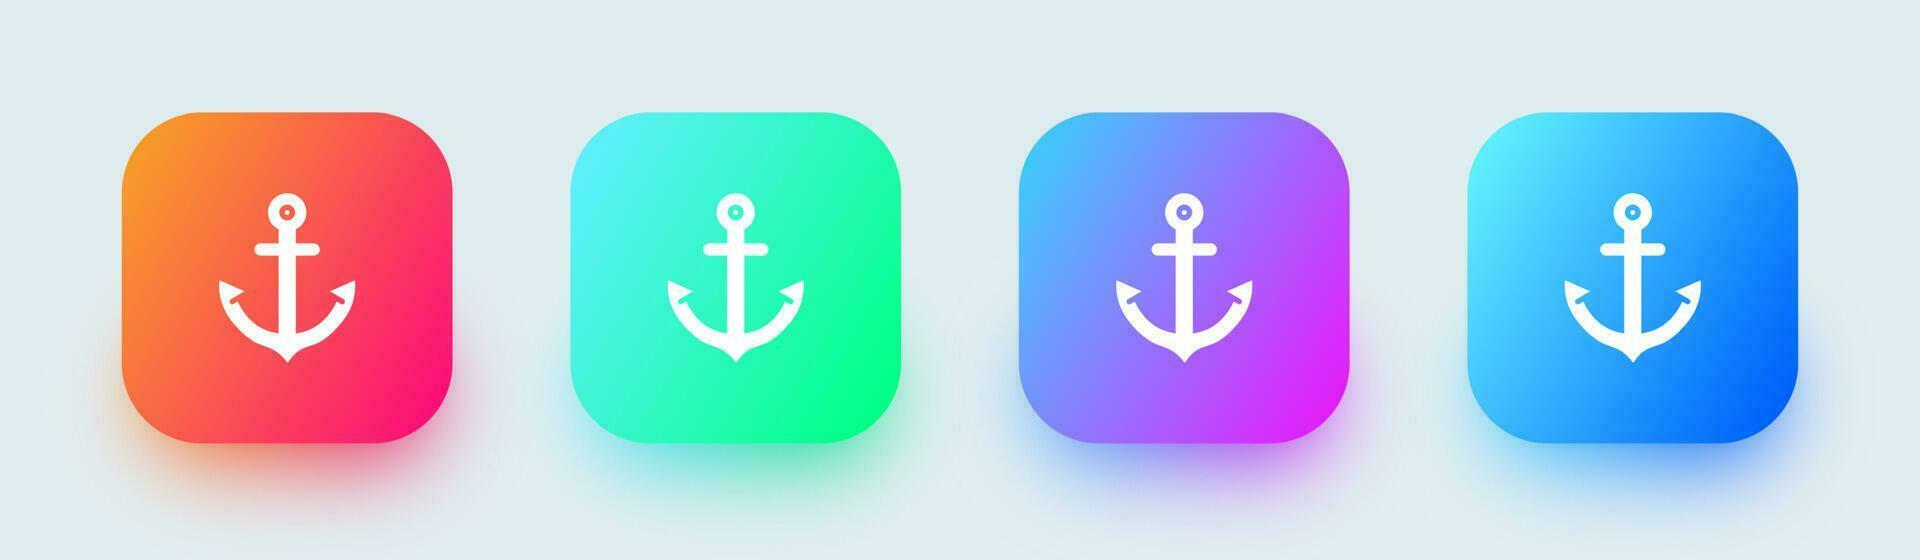 Anchor solid icon in square gradient colors. Nautical signs vector illustration.